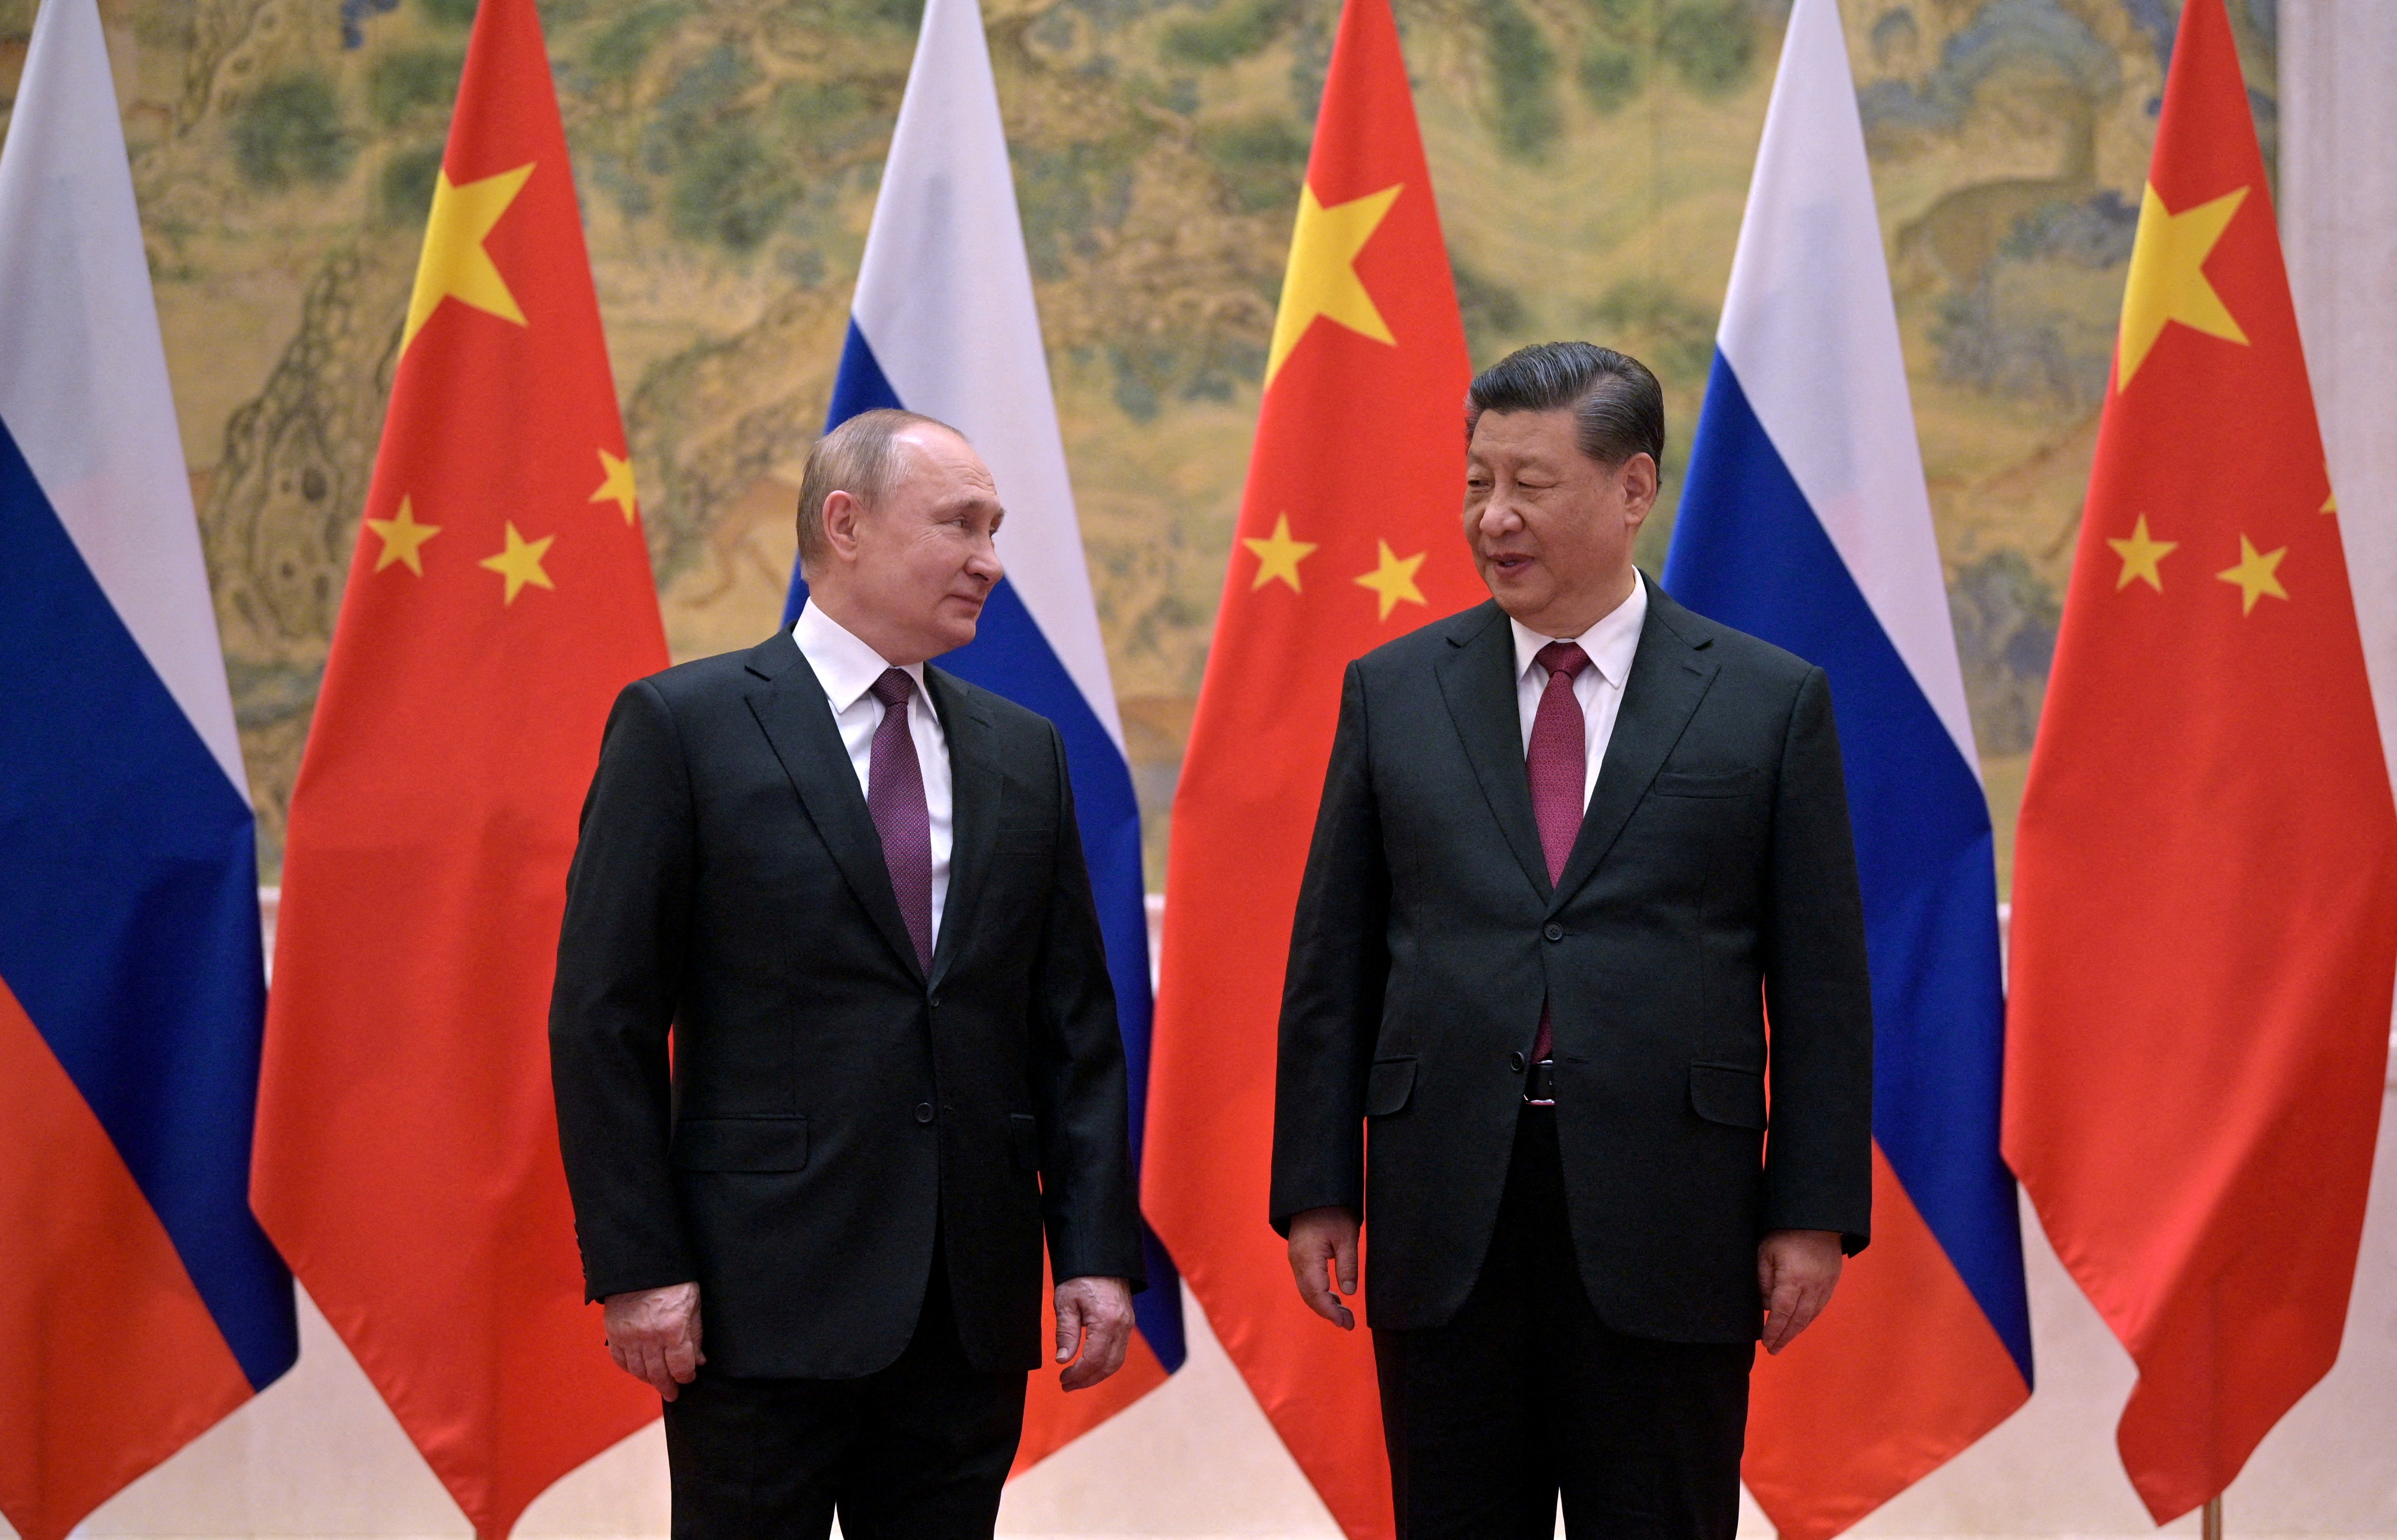 Xi to meet Putin in first trip outside China since COVID Pandemibegan